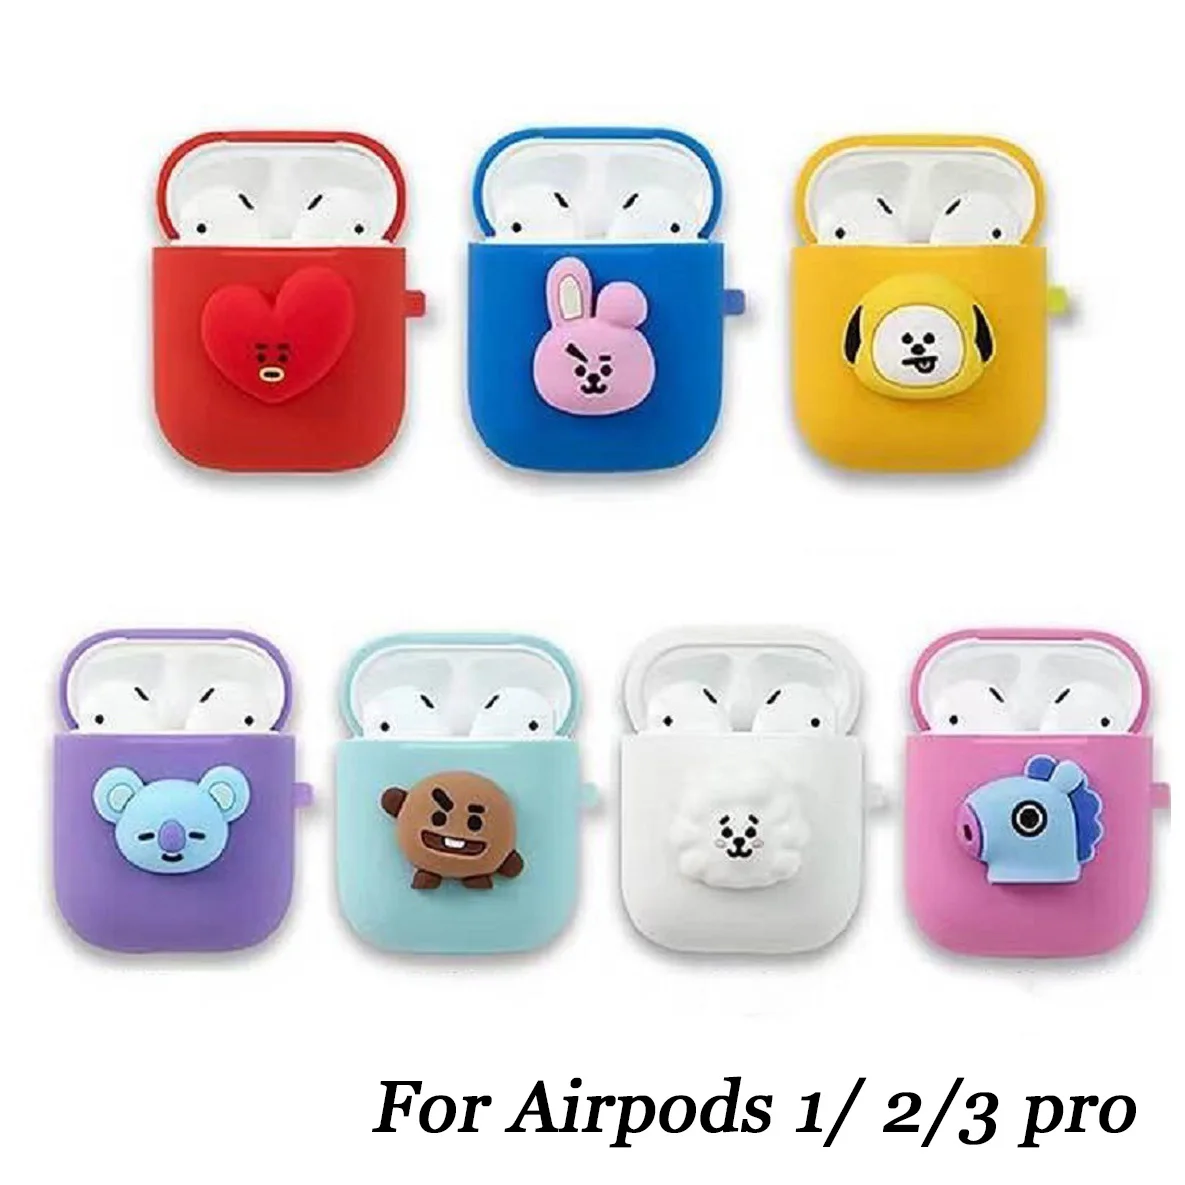 Kawaii Bt21 Airpods Case for Airpods 1/ 2/3 Pro Silica Gel Bluetooth Headset Cover Case Funda Airpod 1/ 2/3 Cover